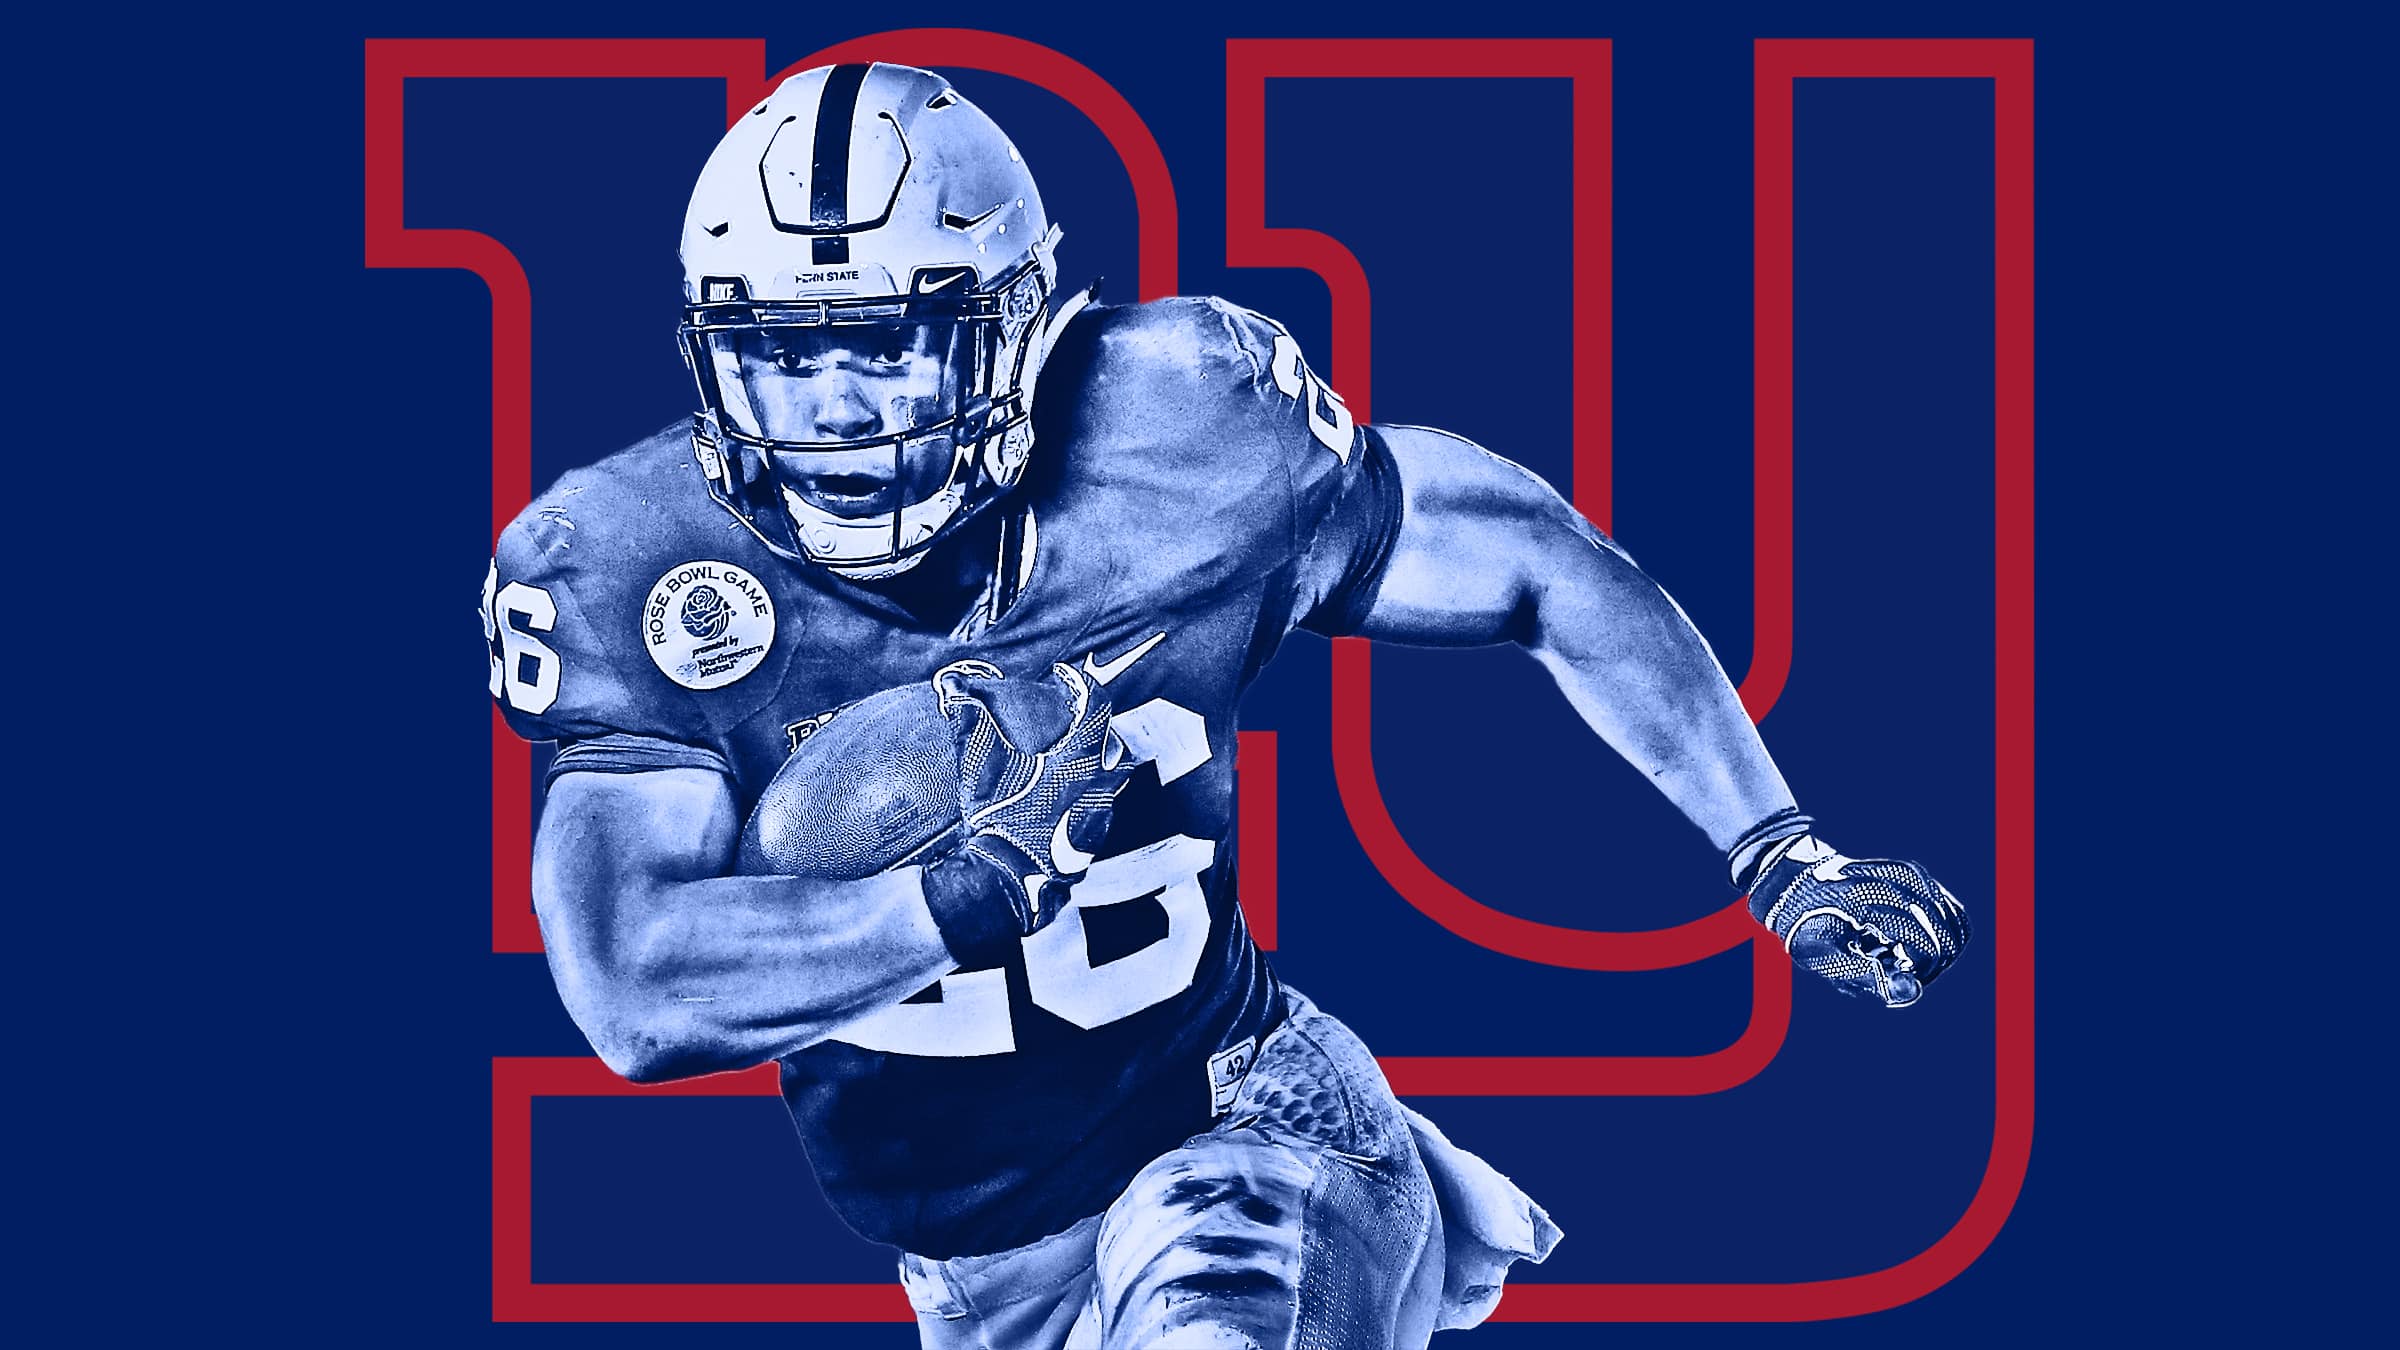 Free download New York Giants select Saquon Barkley with the 2nd.